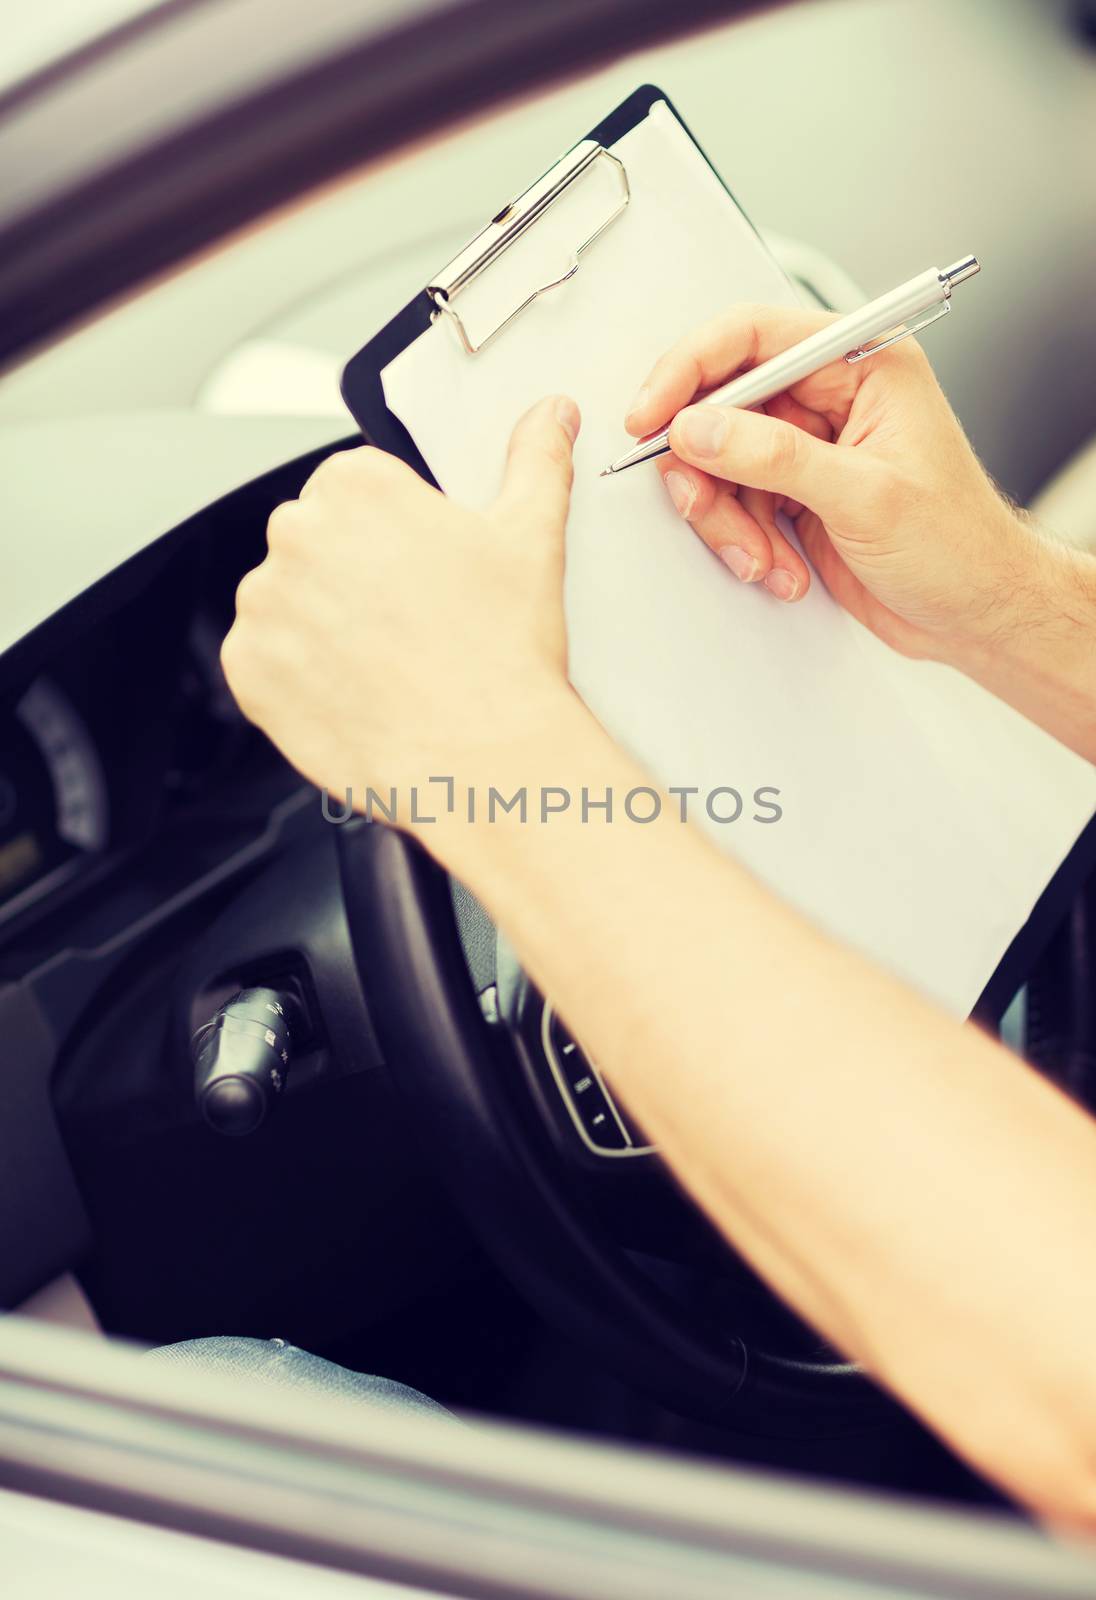 transportation and ownership concept - man with car documents